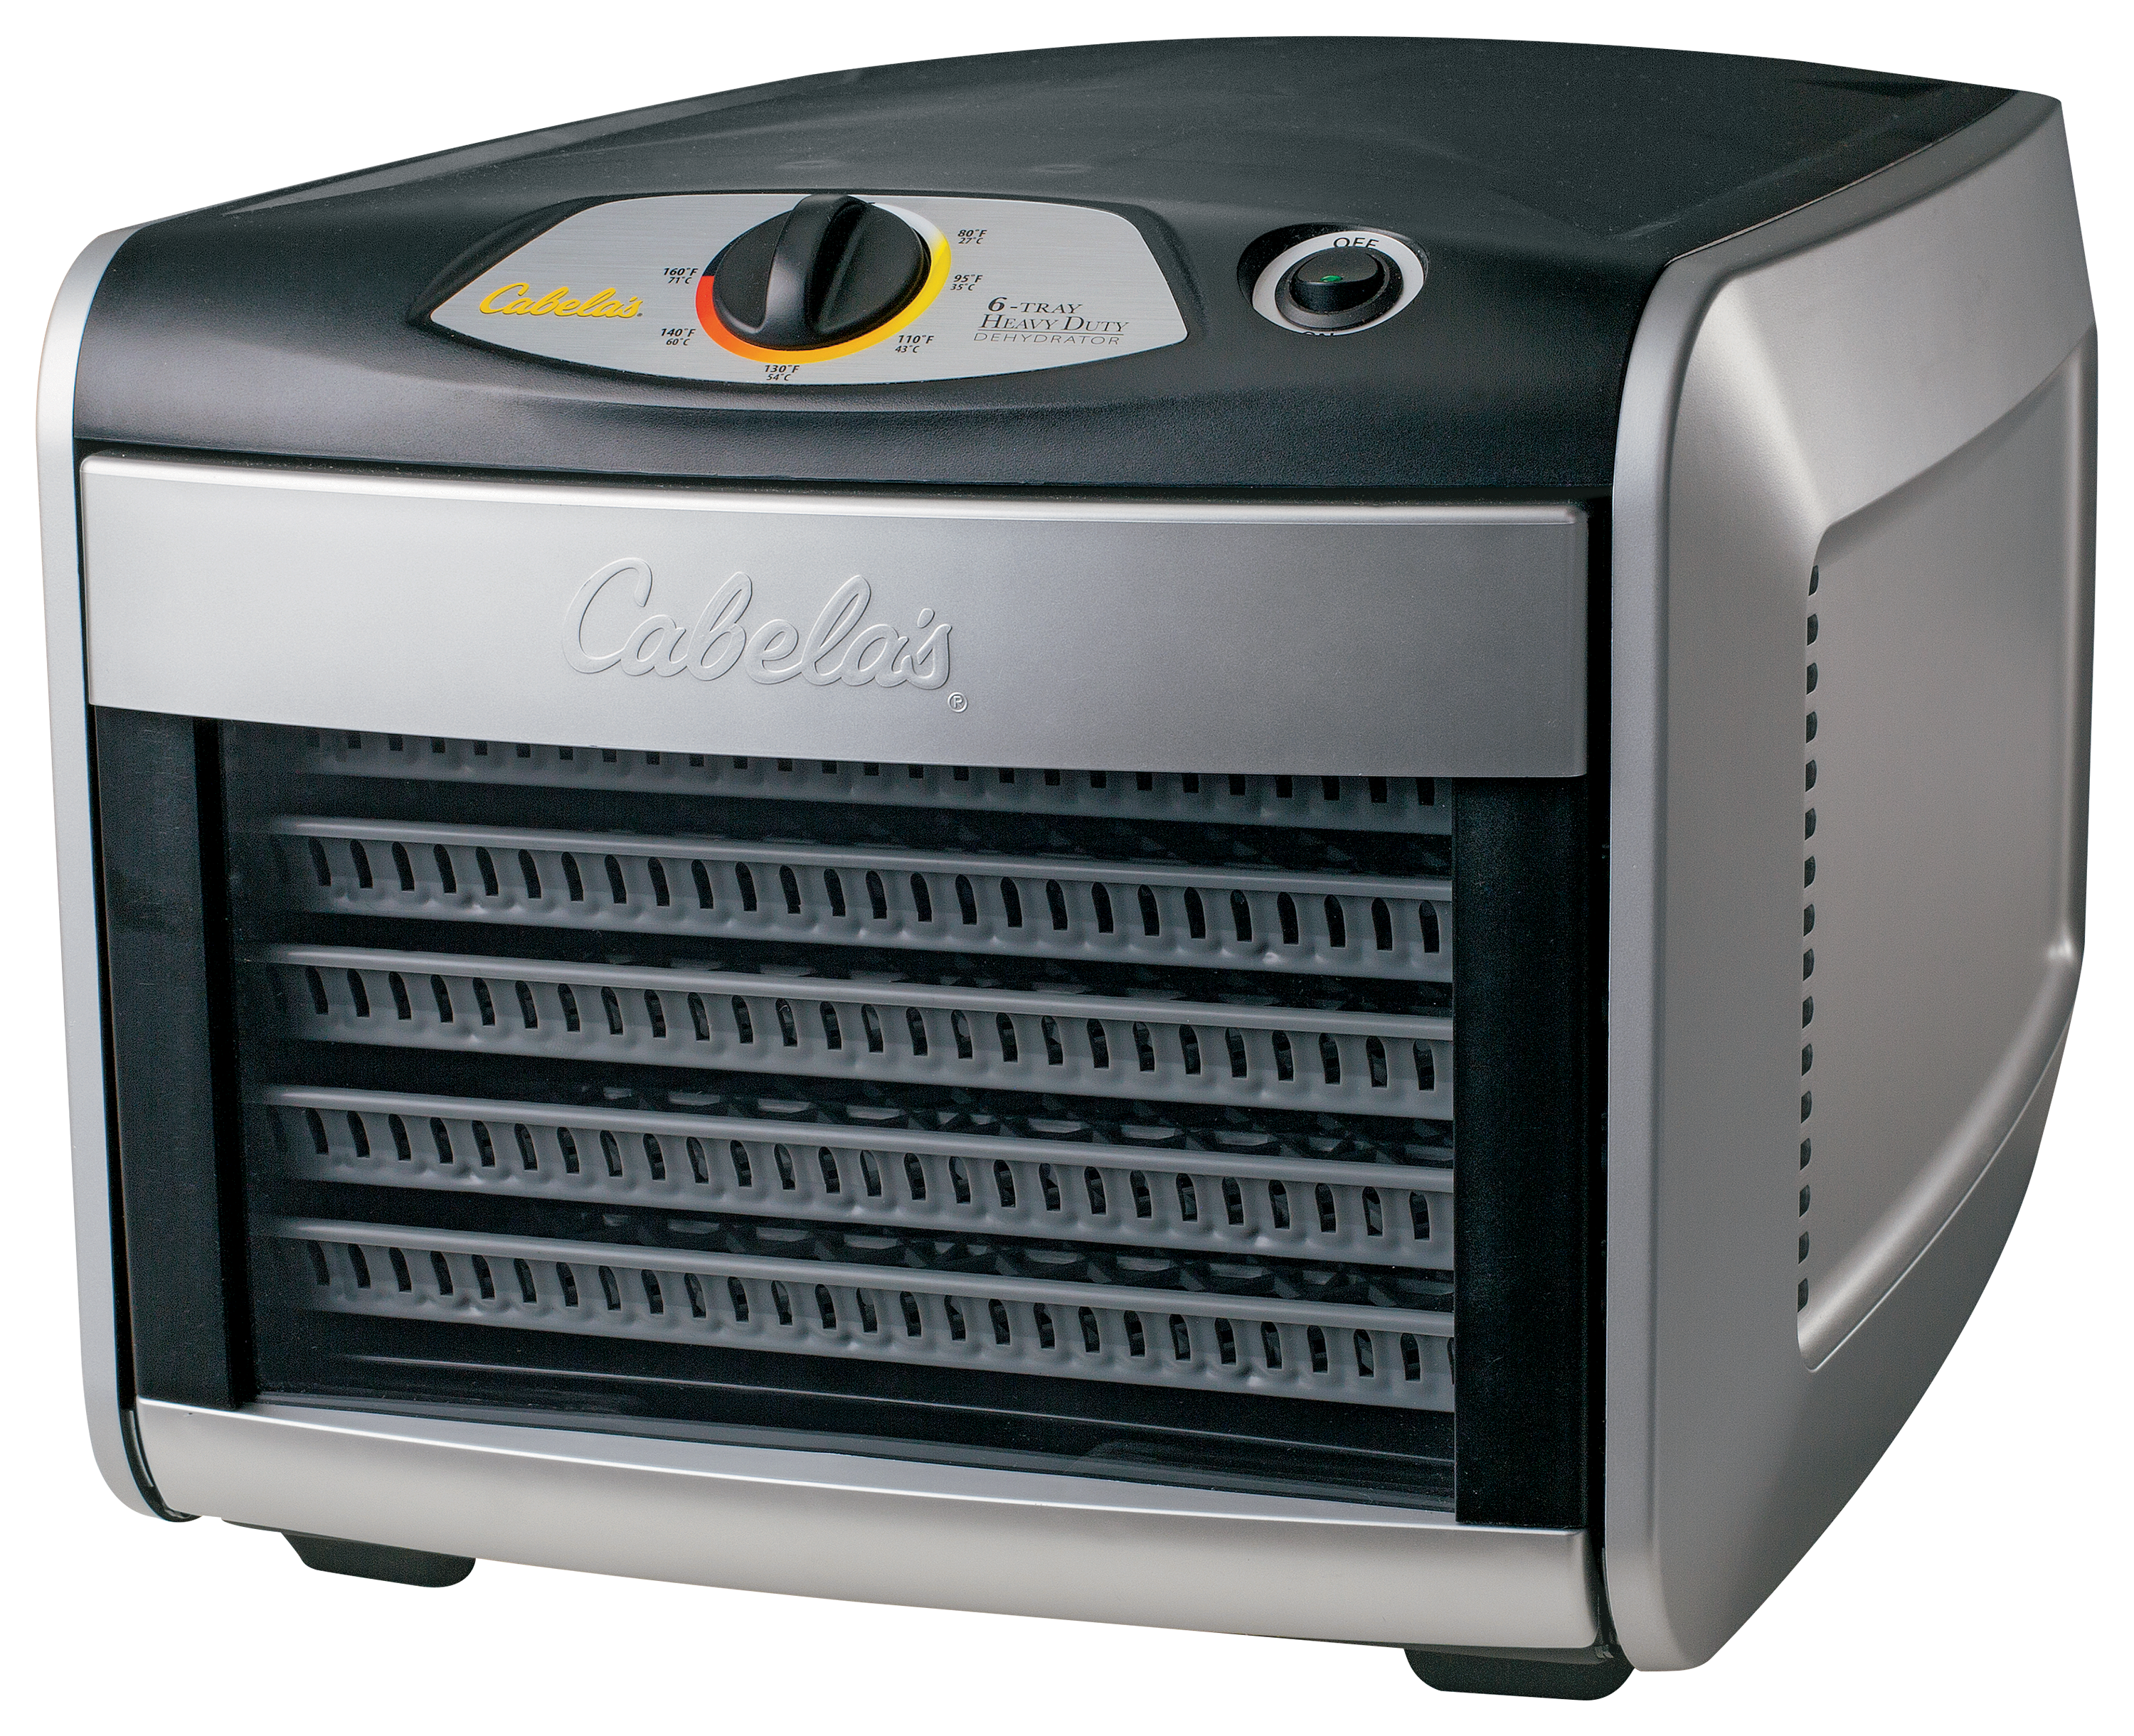 Anyone have experience with a Cabela's dehydrator? This looks like